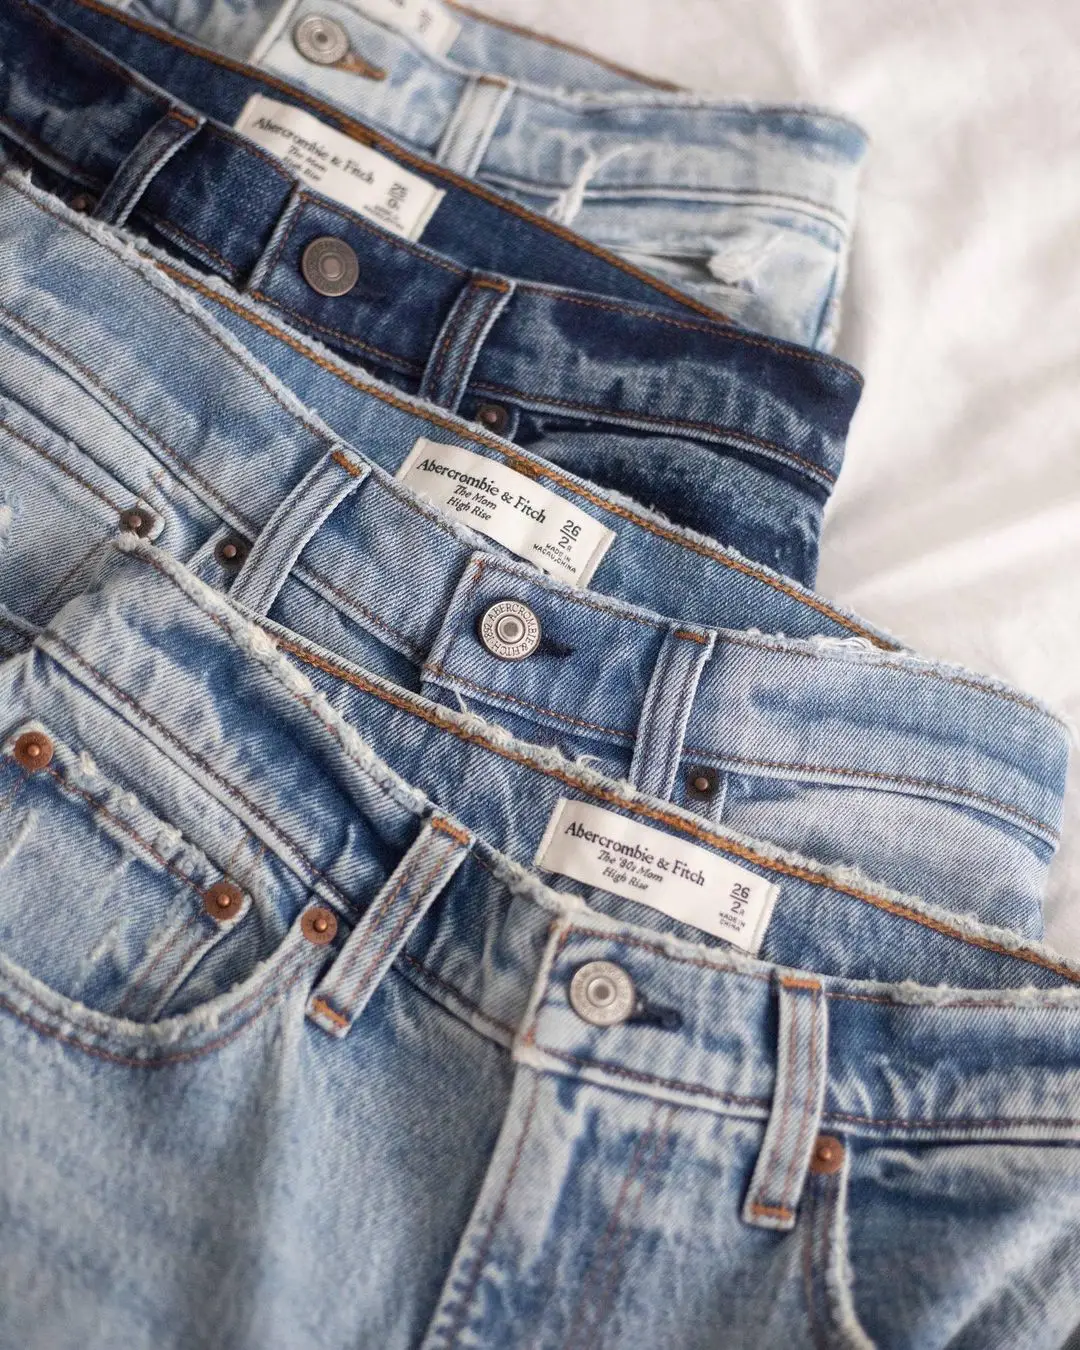 17 Brands to Buy Perfect Jeans for Men ...